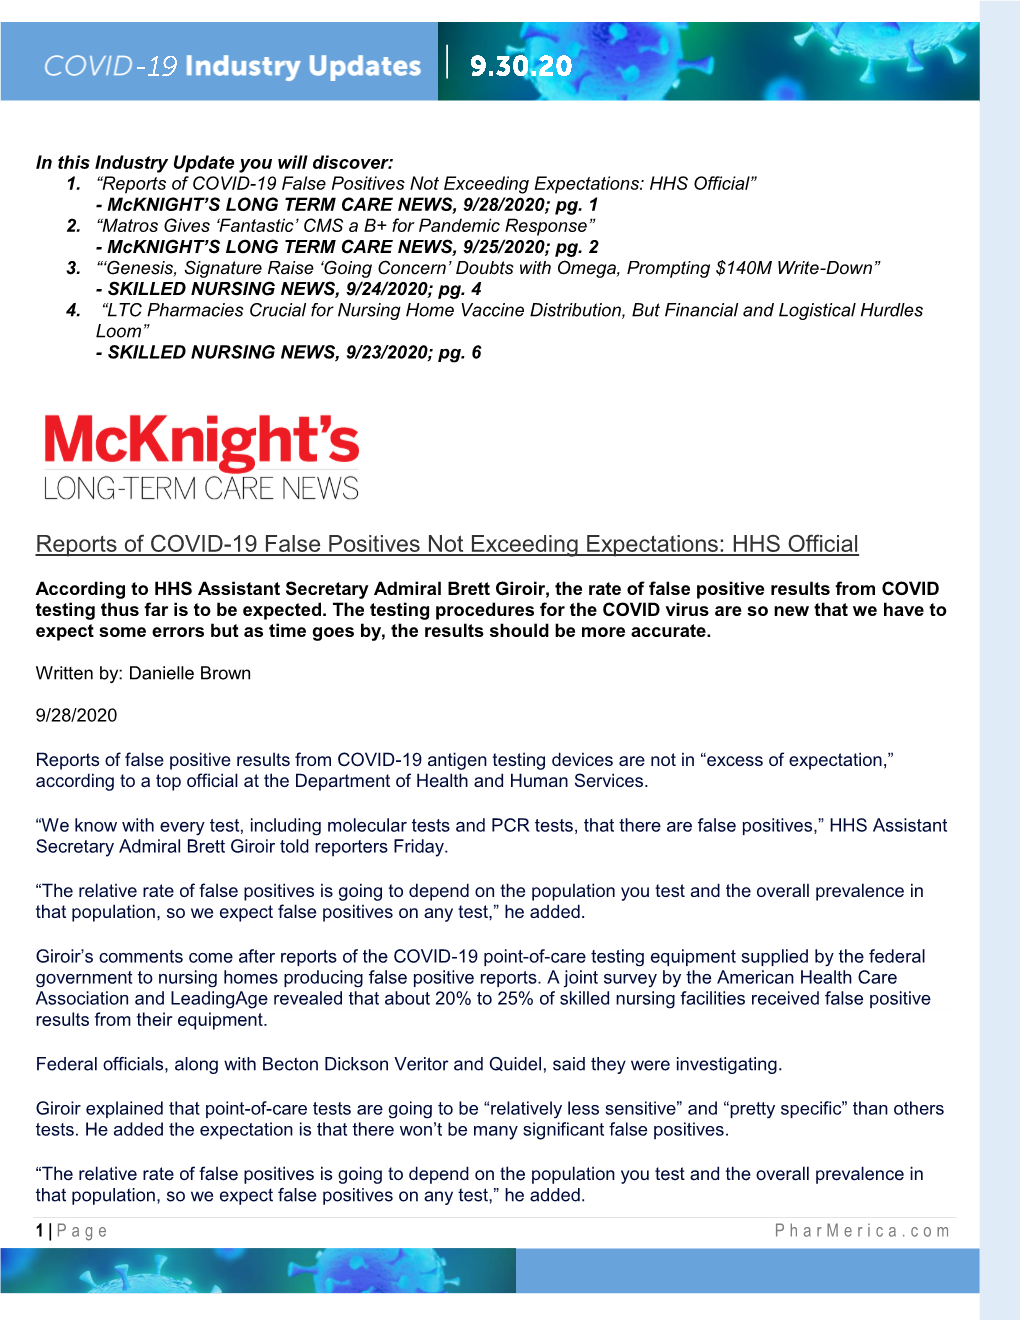 Reports of COVID-19 False Positives Not Exceeding Expectations: HHS Official” - Mcknight’S LONG TERM CARE NEWS, 9/28/2020; Pg